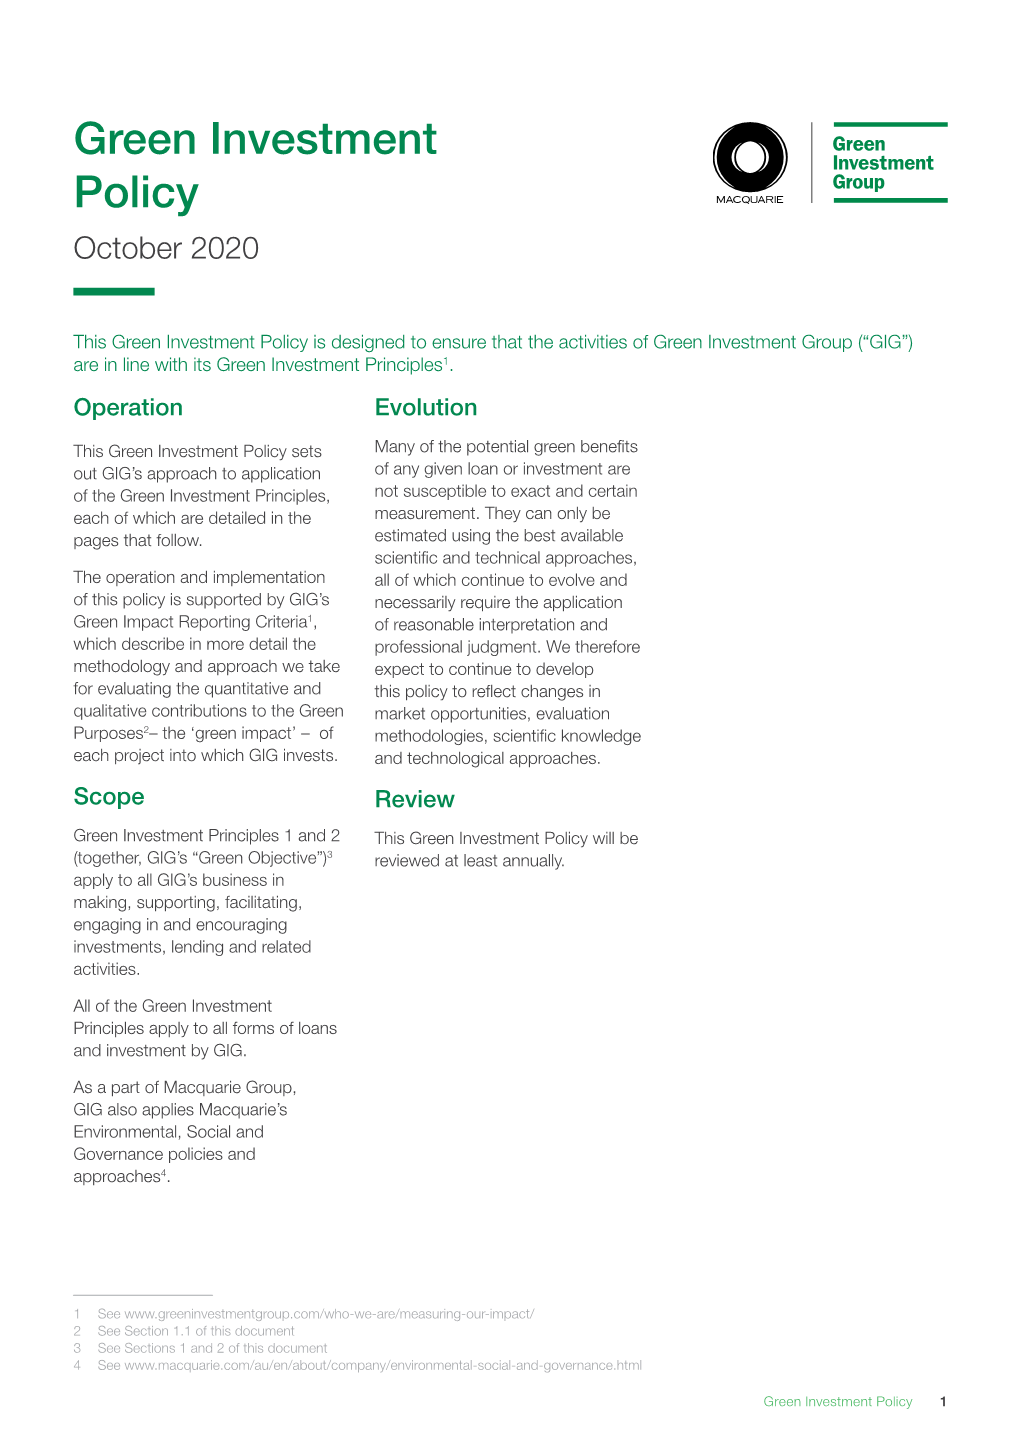 Green Investment Policy October 2020